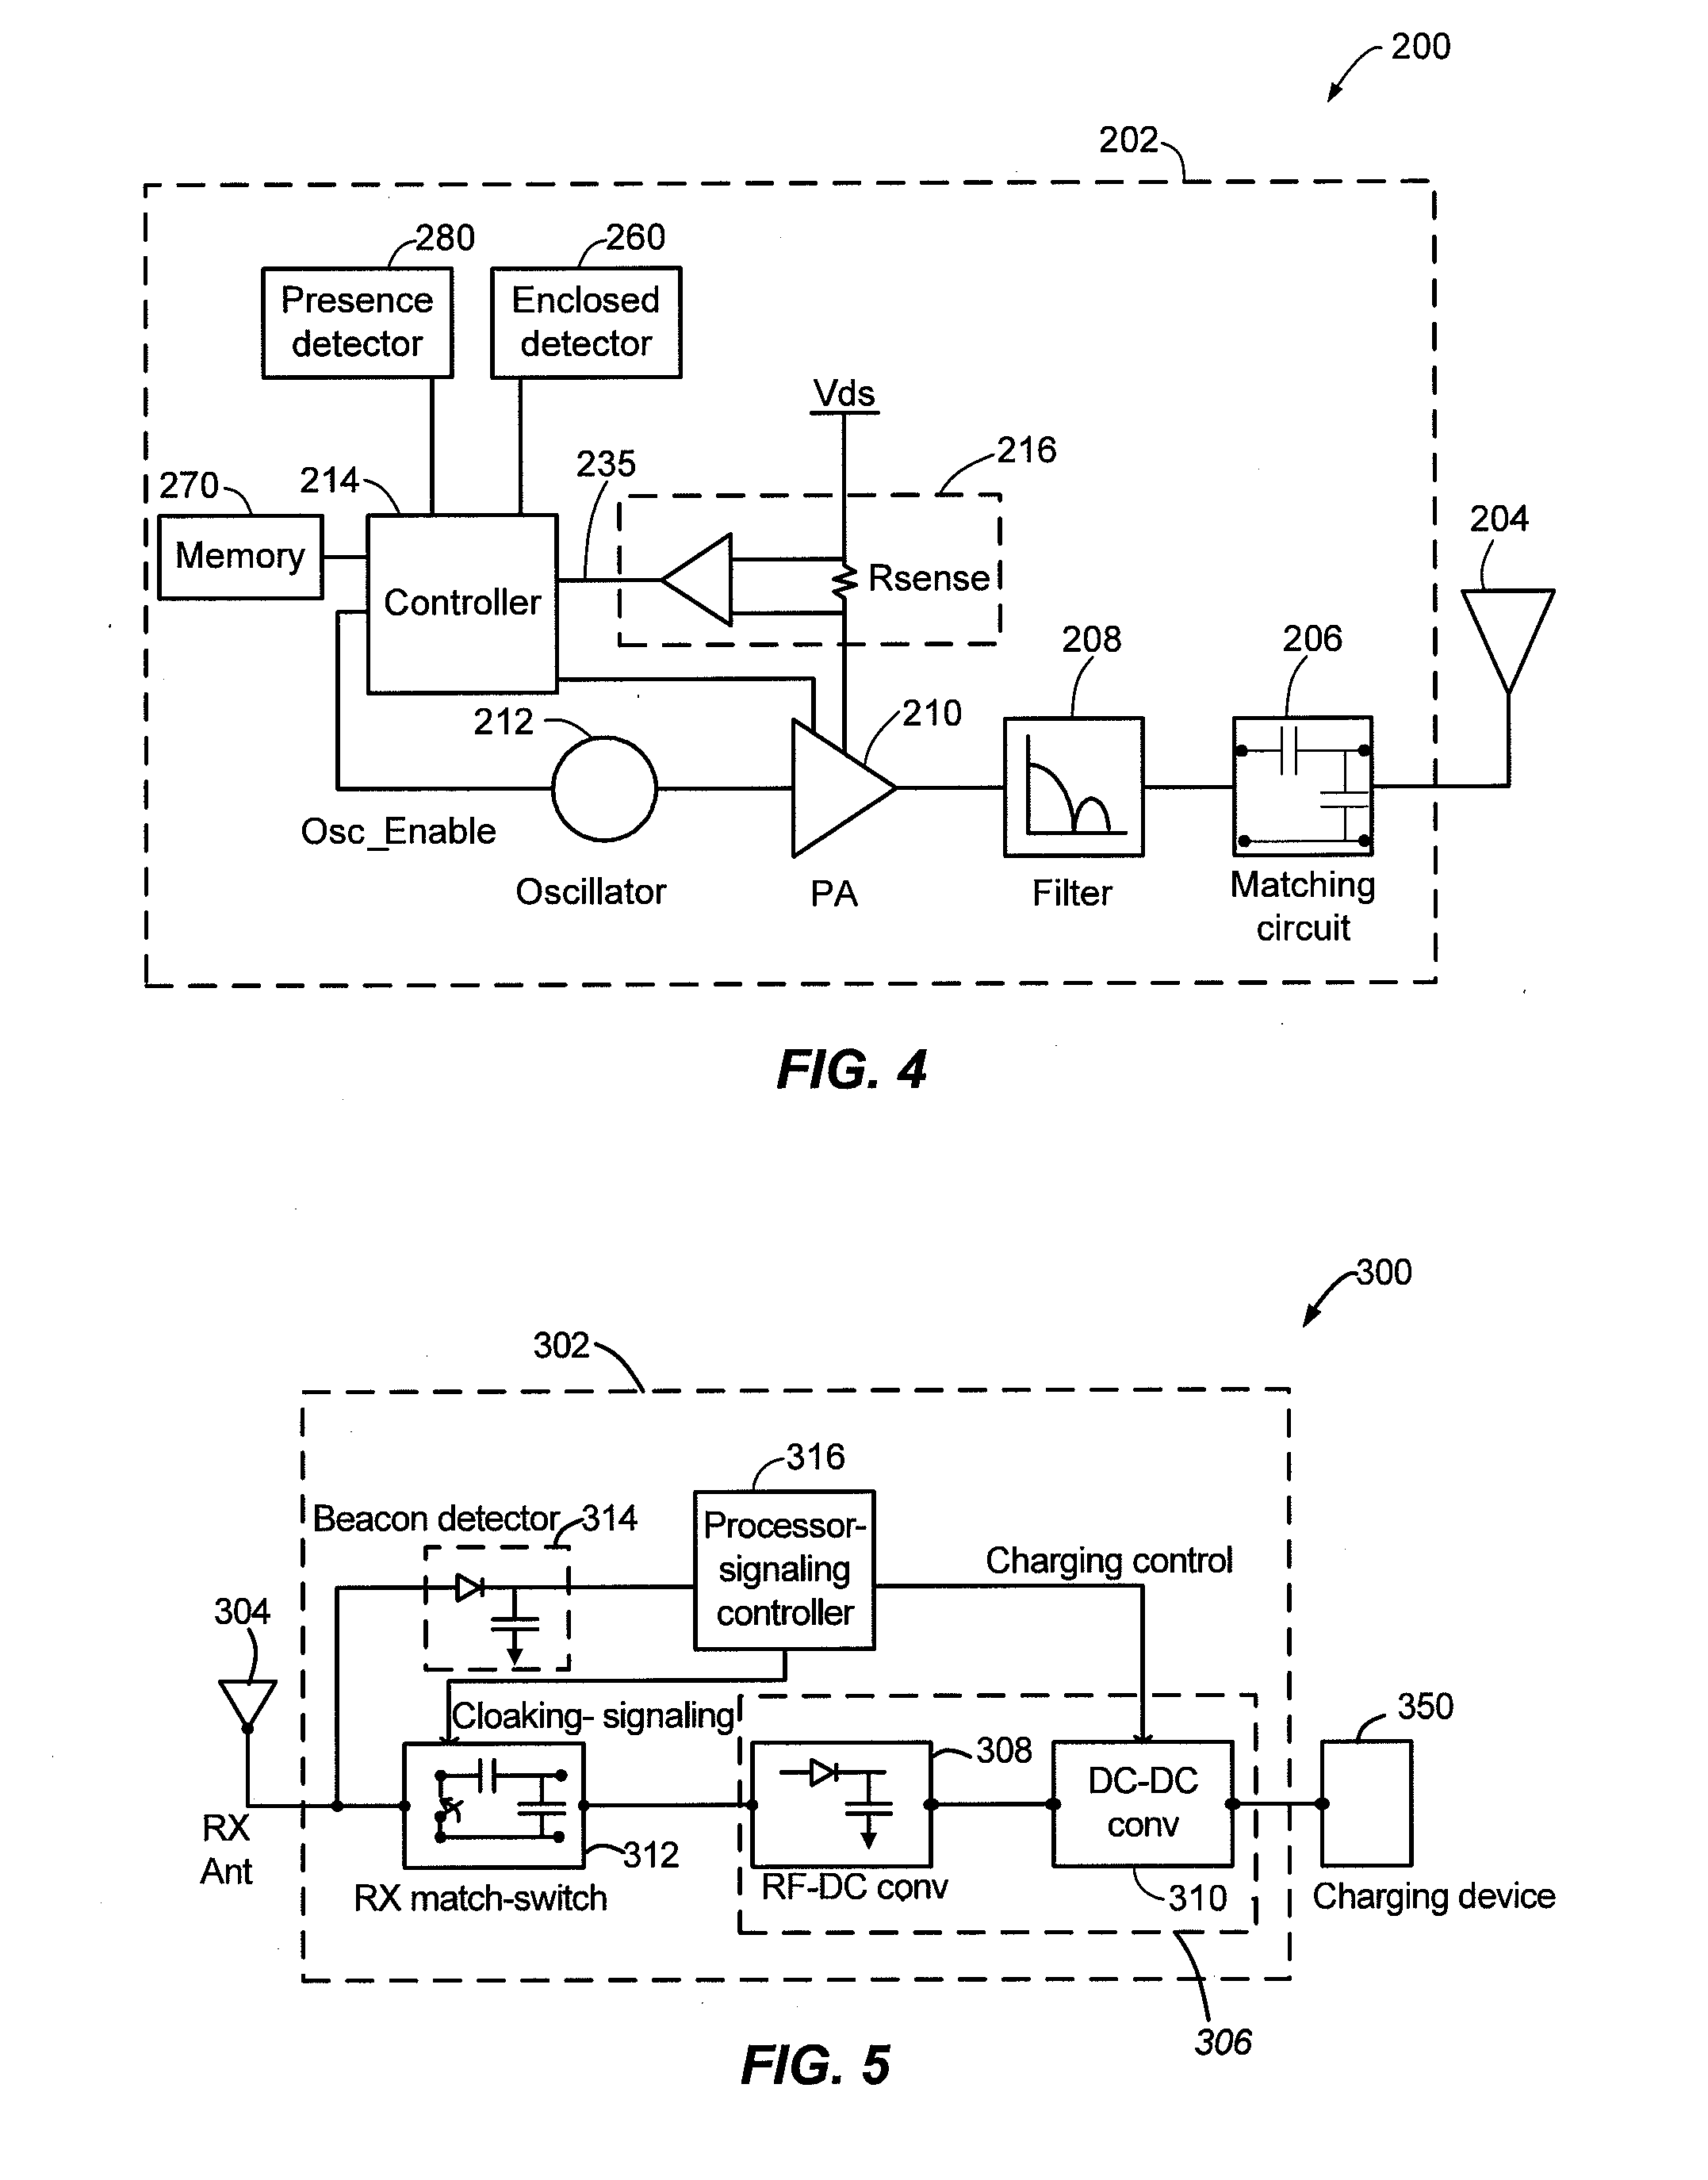 Receiver for near field communication and wireless power functionalities